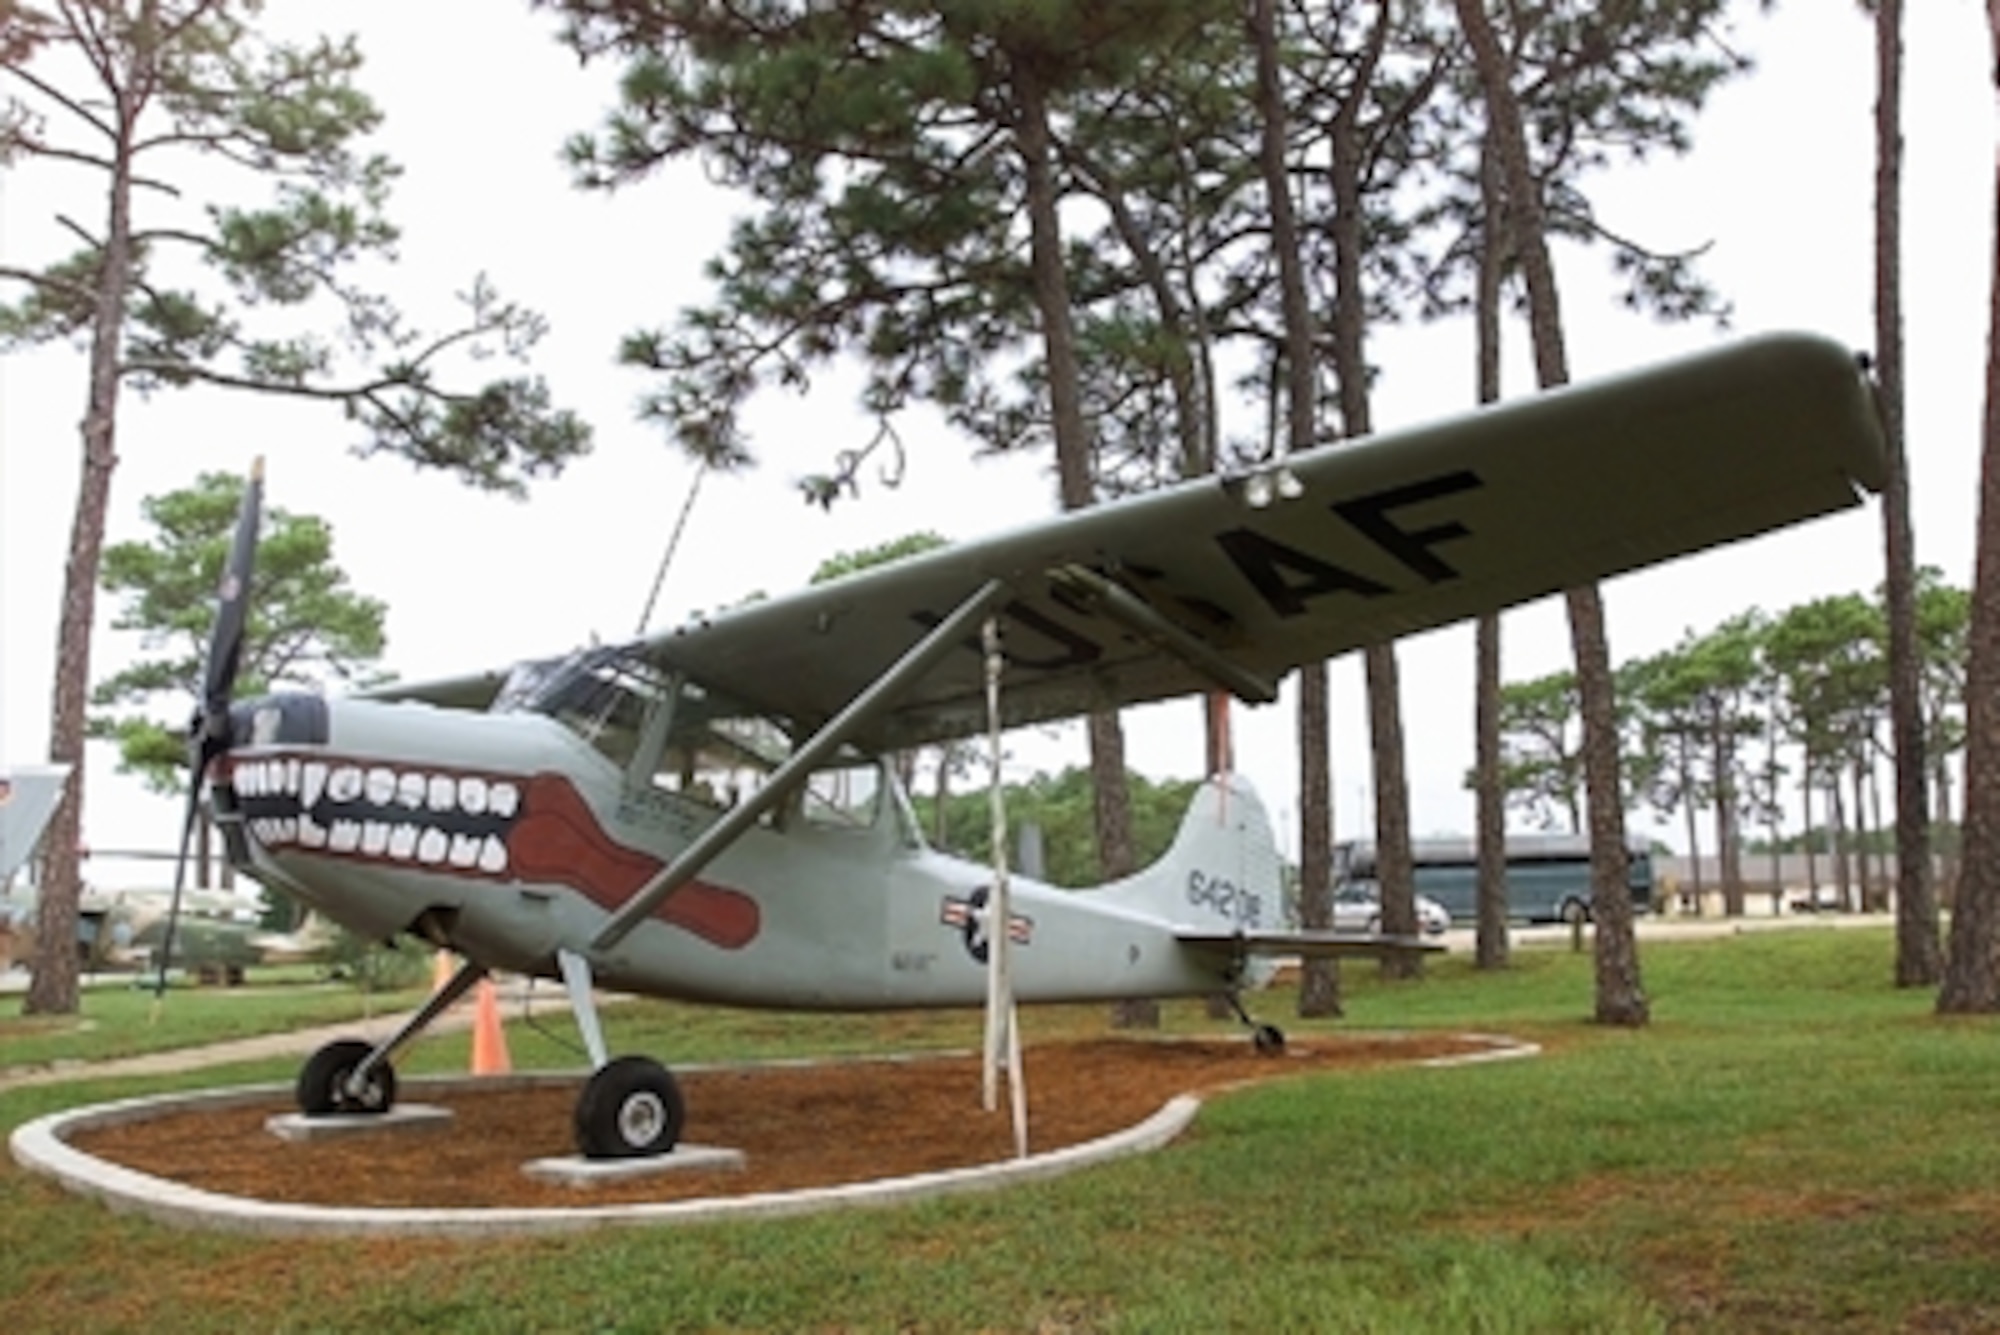 In 1950 Cessna won an Army design competition for a light, two-seat liaison and observation aircraft. They mated the wings and tail of one aircraft to a new fuselage with a large windowed "glasshouse" cabin and a 213 horsepower engine. The Army bought this L-19 Bird Dog which served in the Korean and Vietnam Wars.